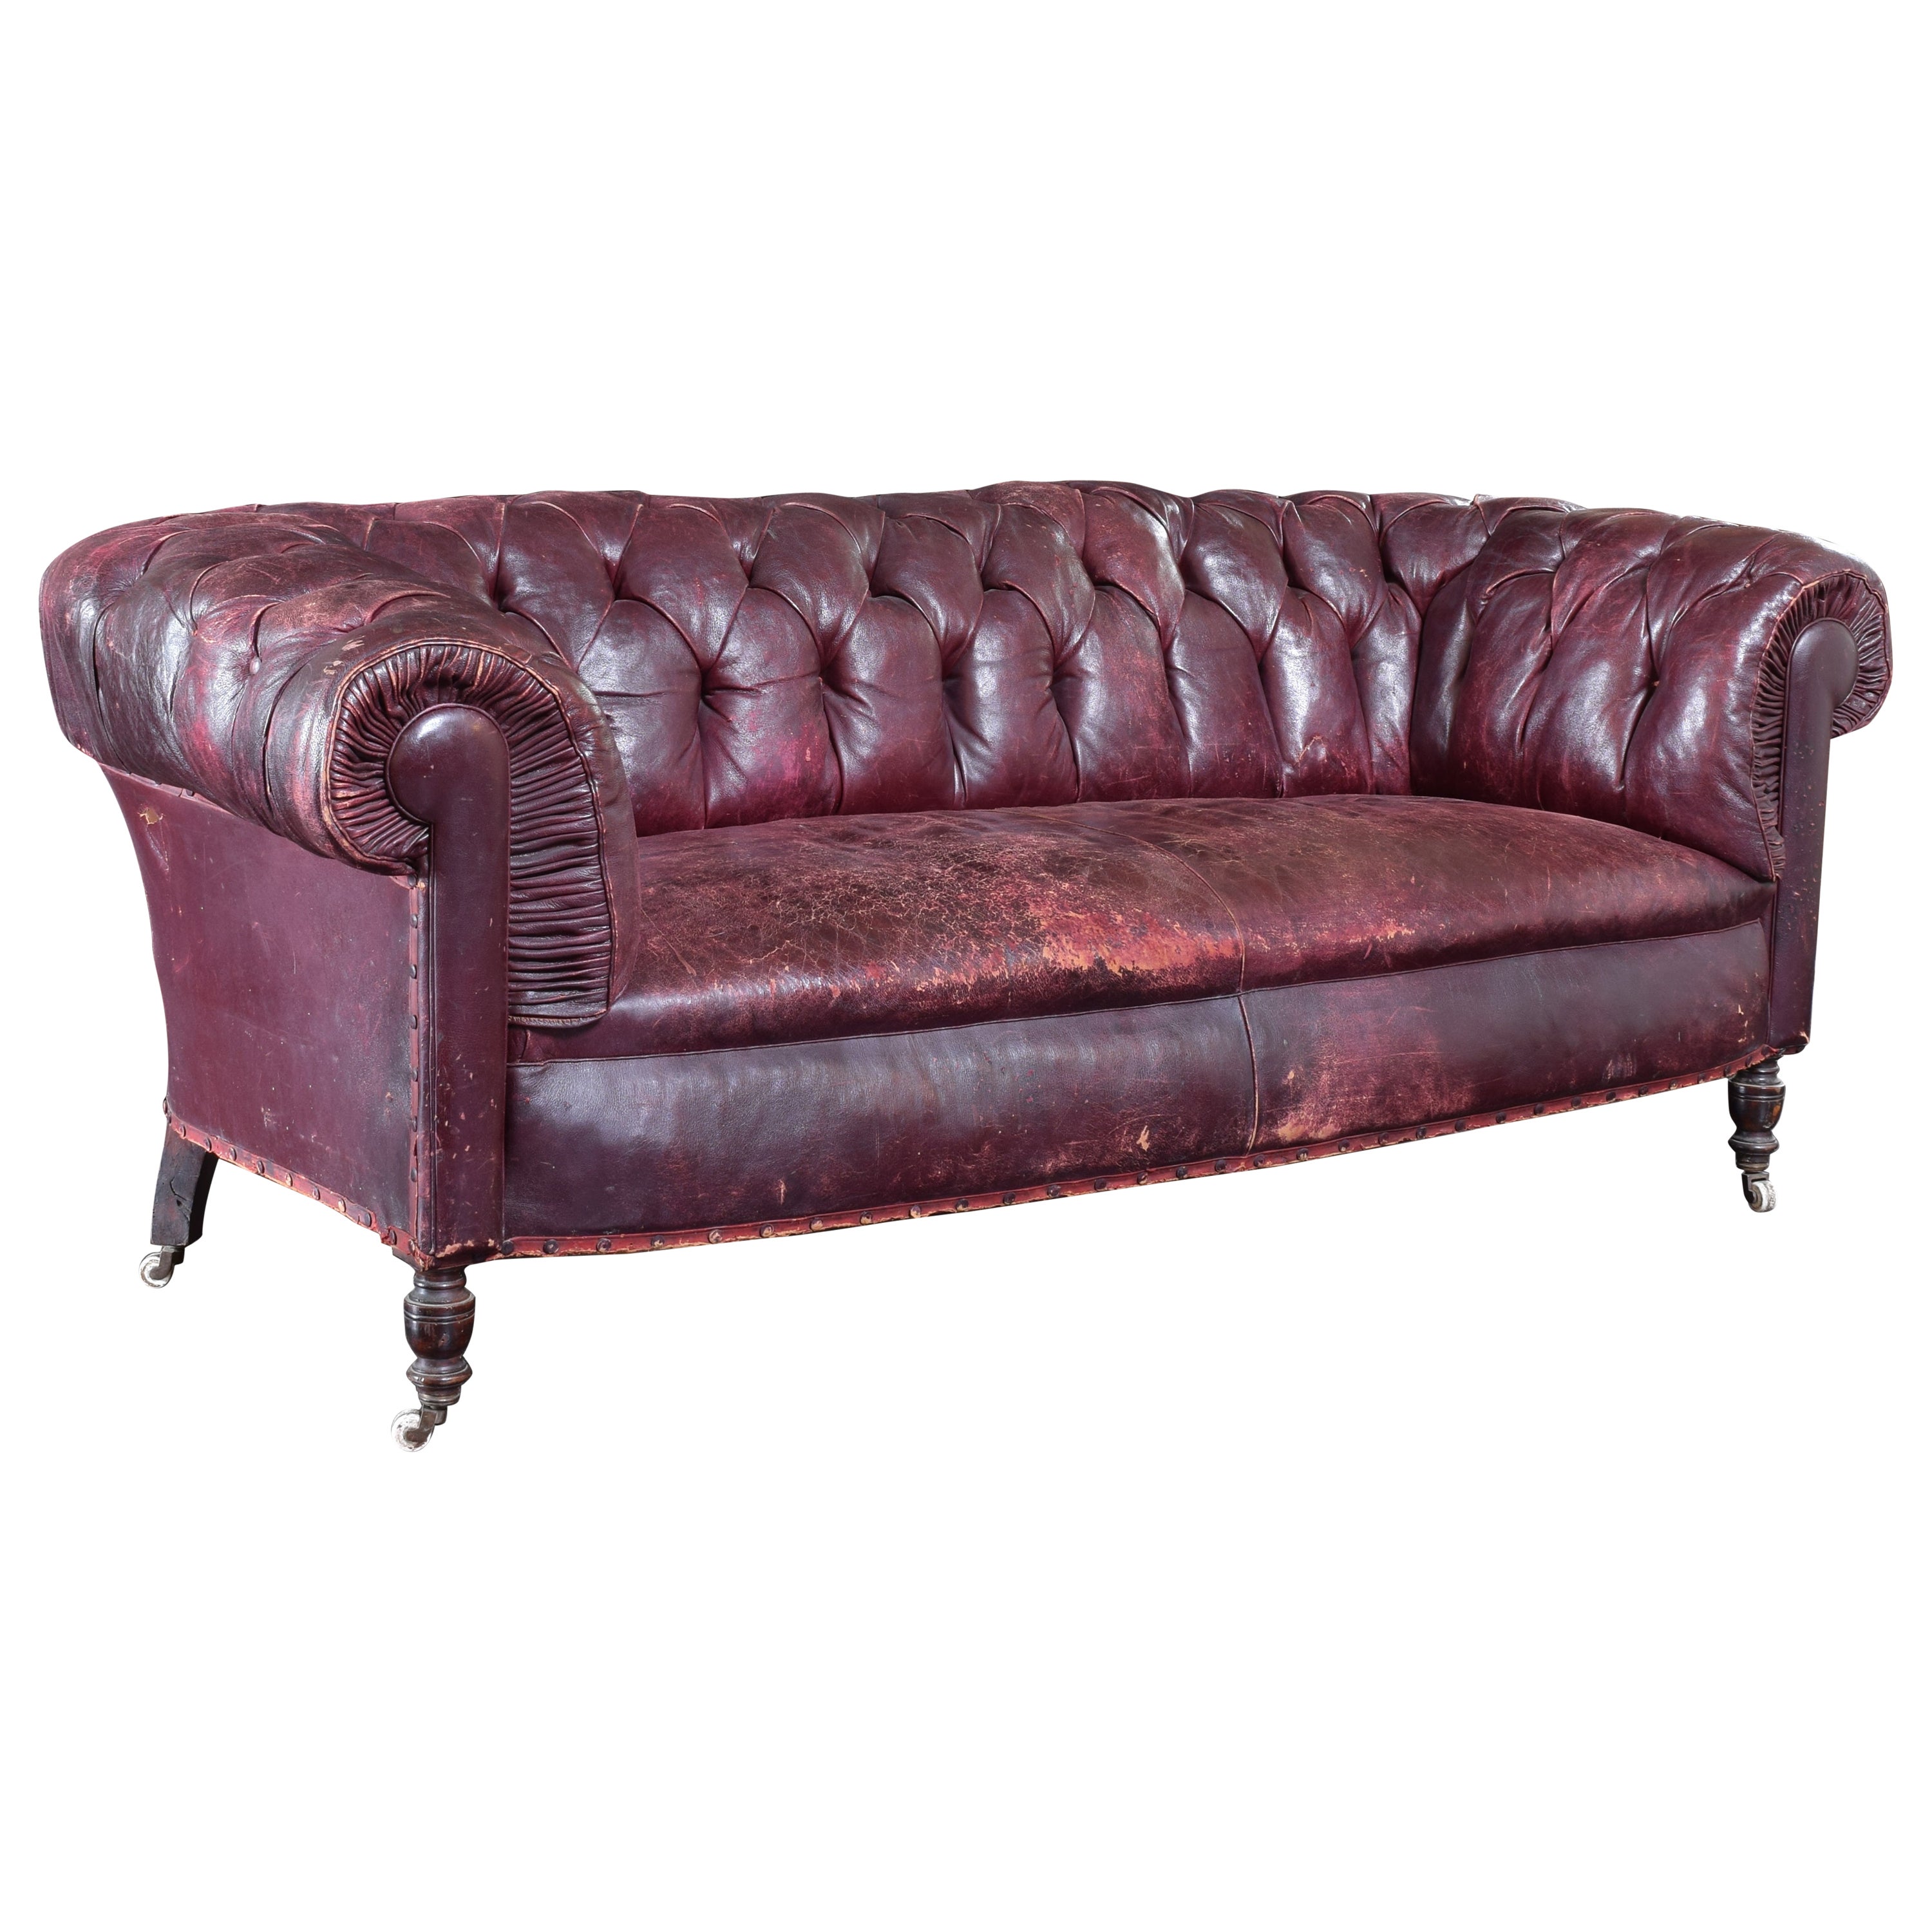 Italian Tufted Leather Upholstered Chesterfield Sofa, late 19thc For Sale